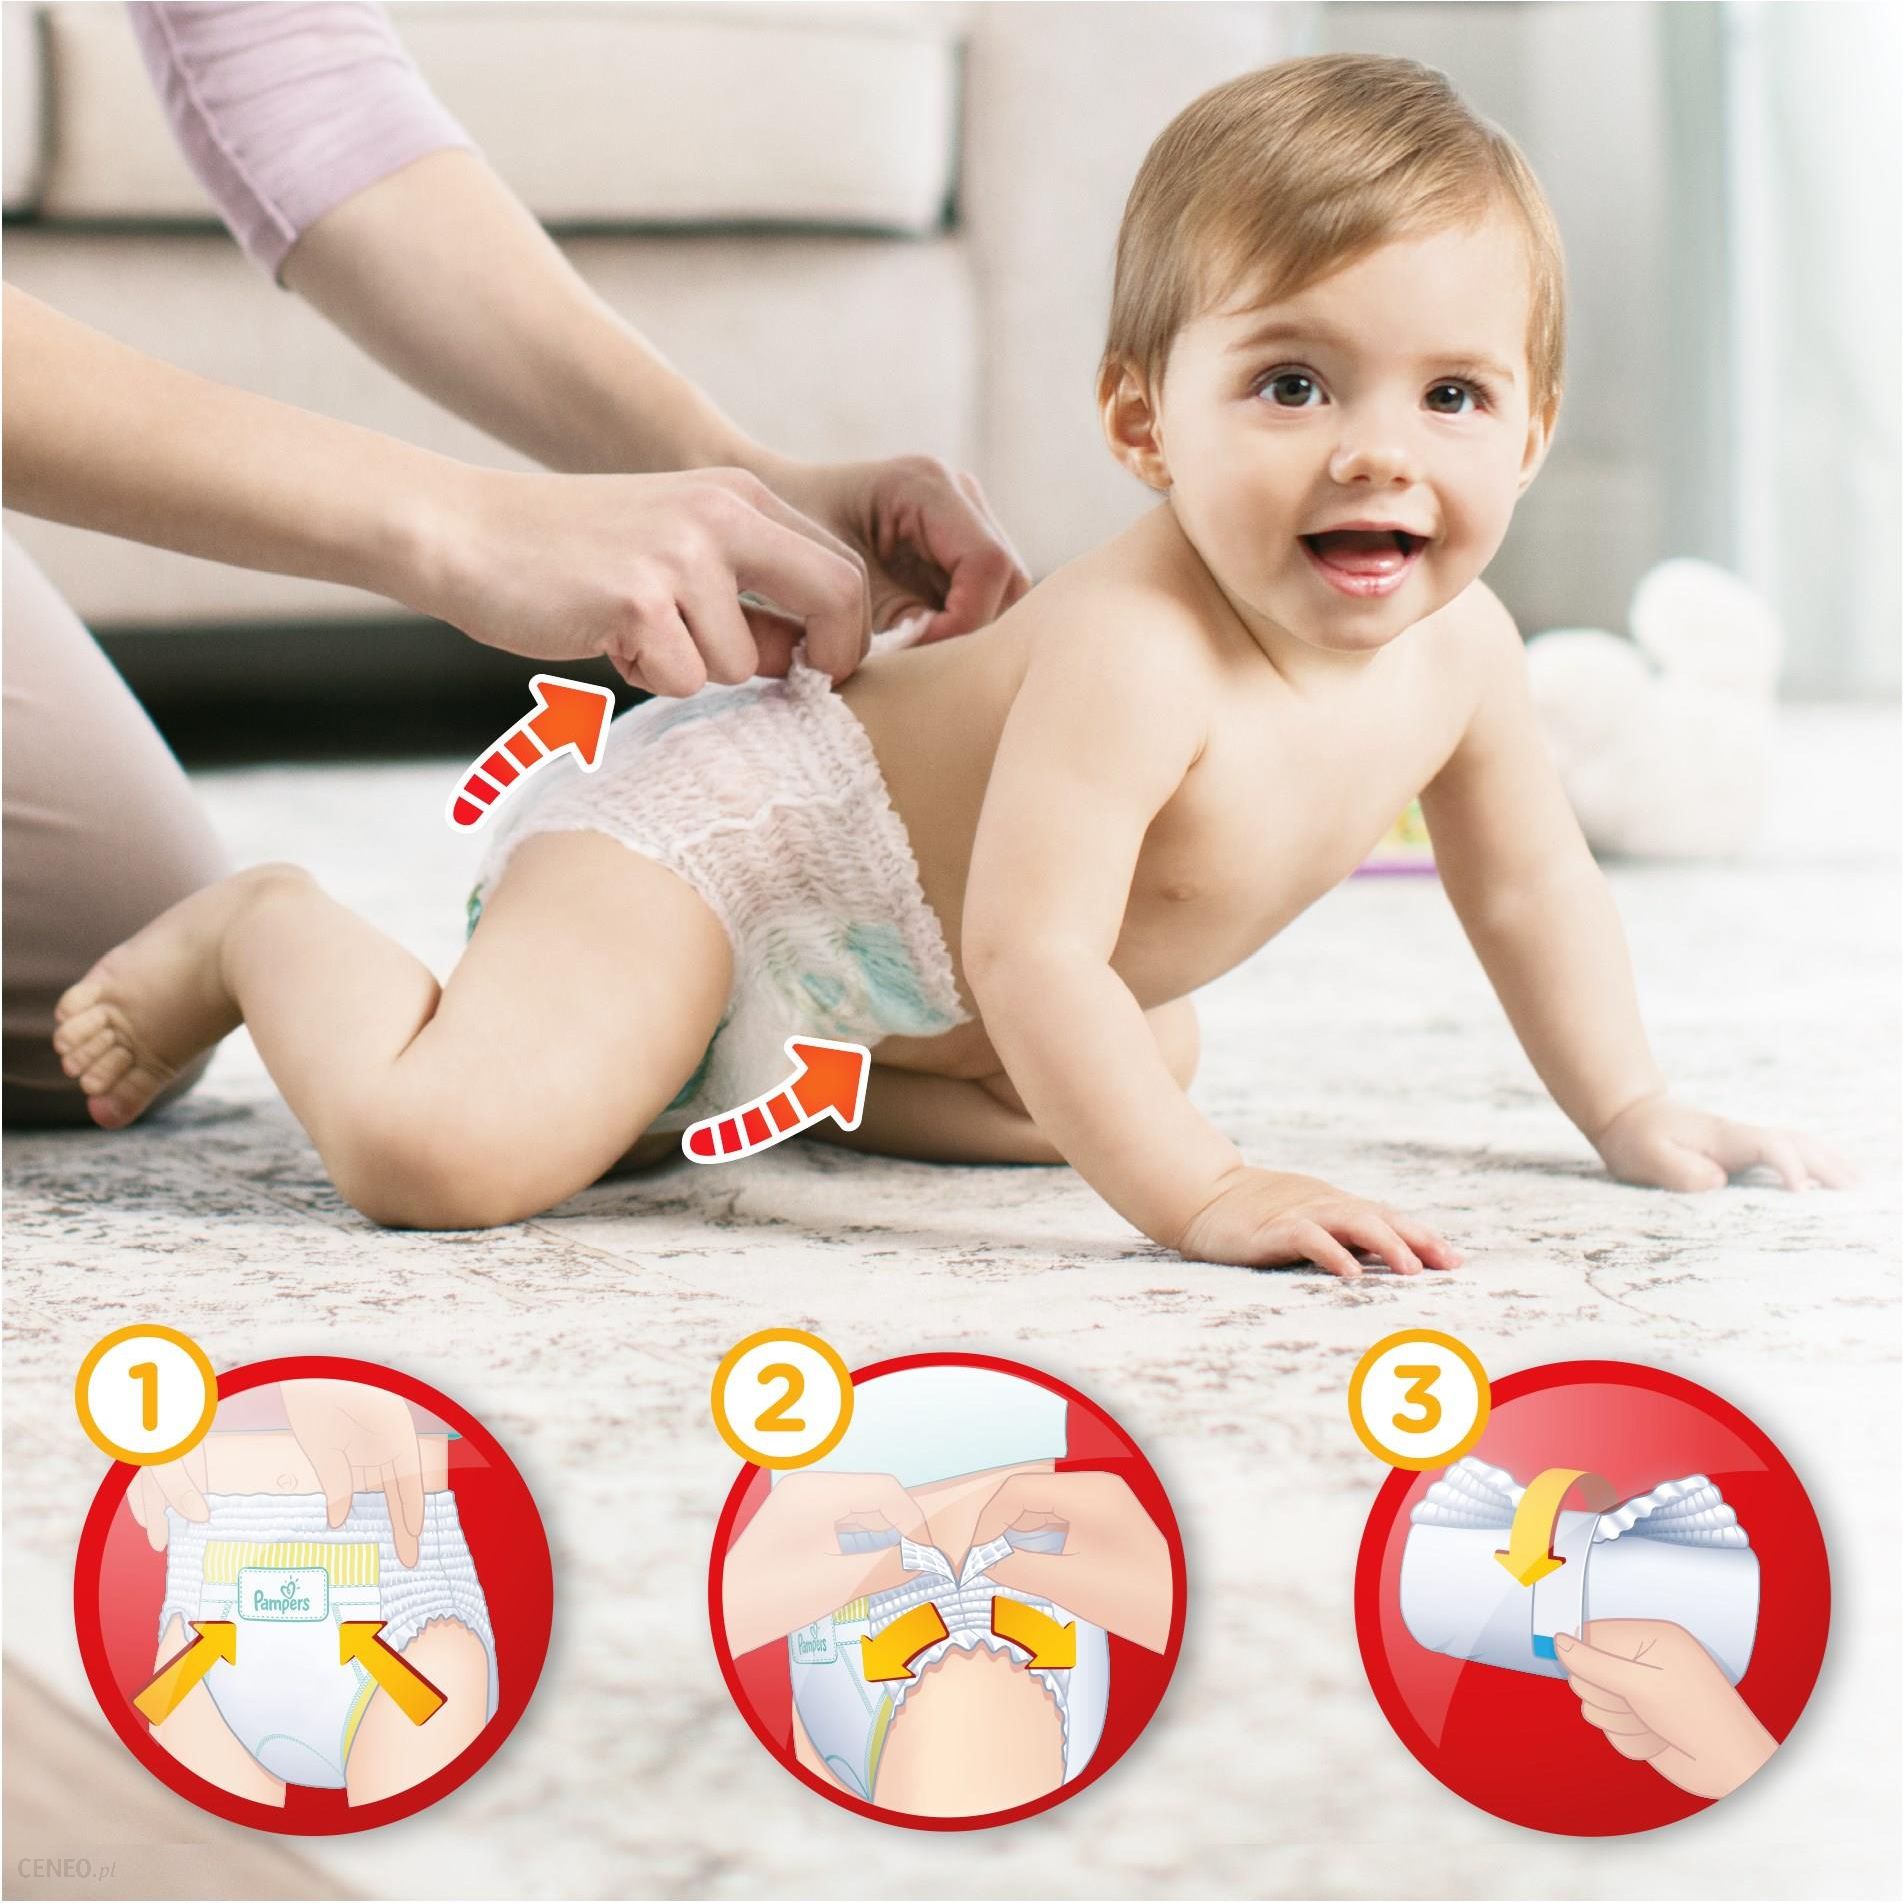 pampers pants 4 176